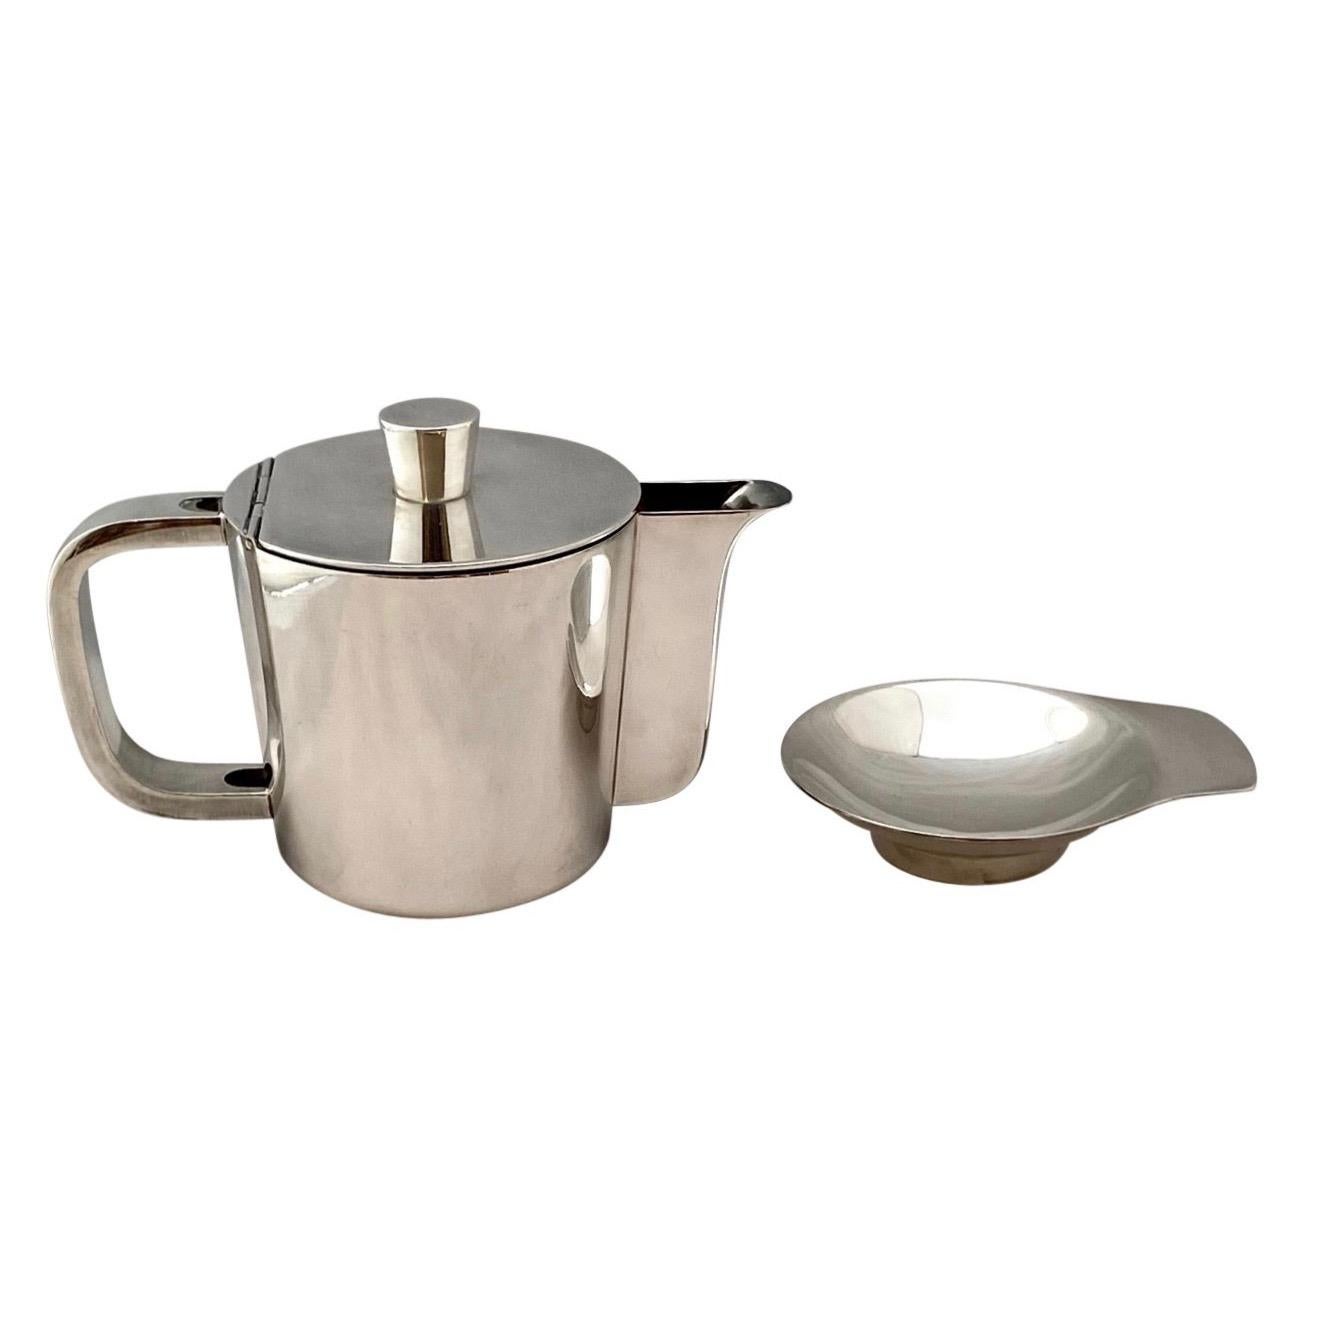 Gio Ponti silver plated metal coffee pot (53cl) designed for the VI Triennale, and a small dish, Arthur Krupp, 1930s-1950s.
This coffee pot is originally from the Abner Hotel but seems to never have been used!
Literature: Gio Ponti: Interni,